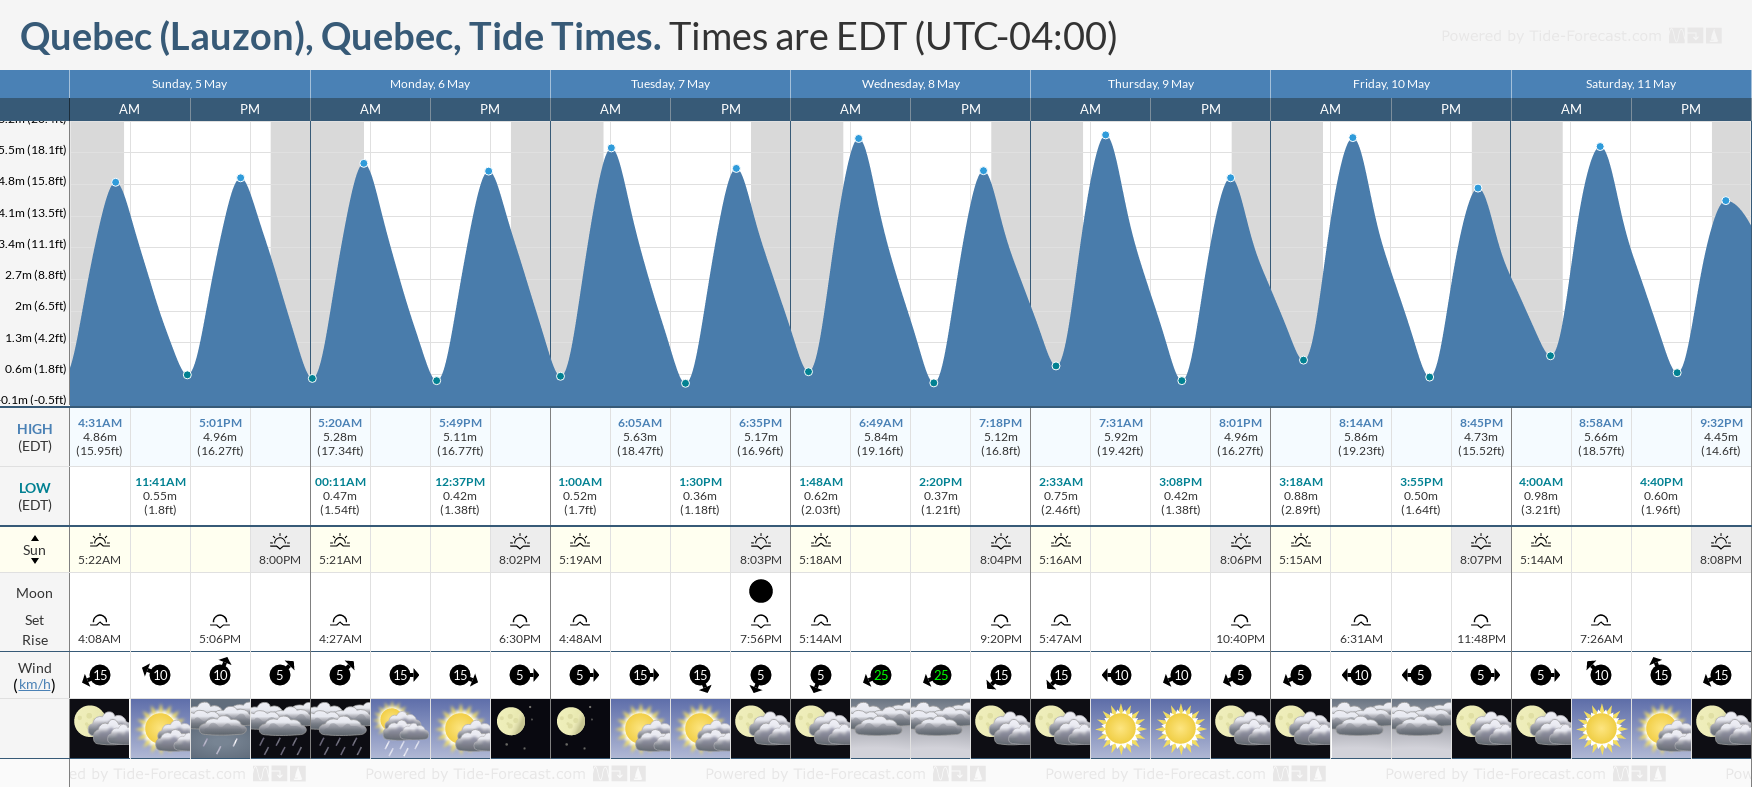 Quebec (Lauzon), Quebec Tide Chart including high and low tide tide times for the next 7 days